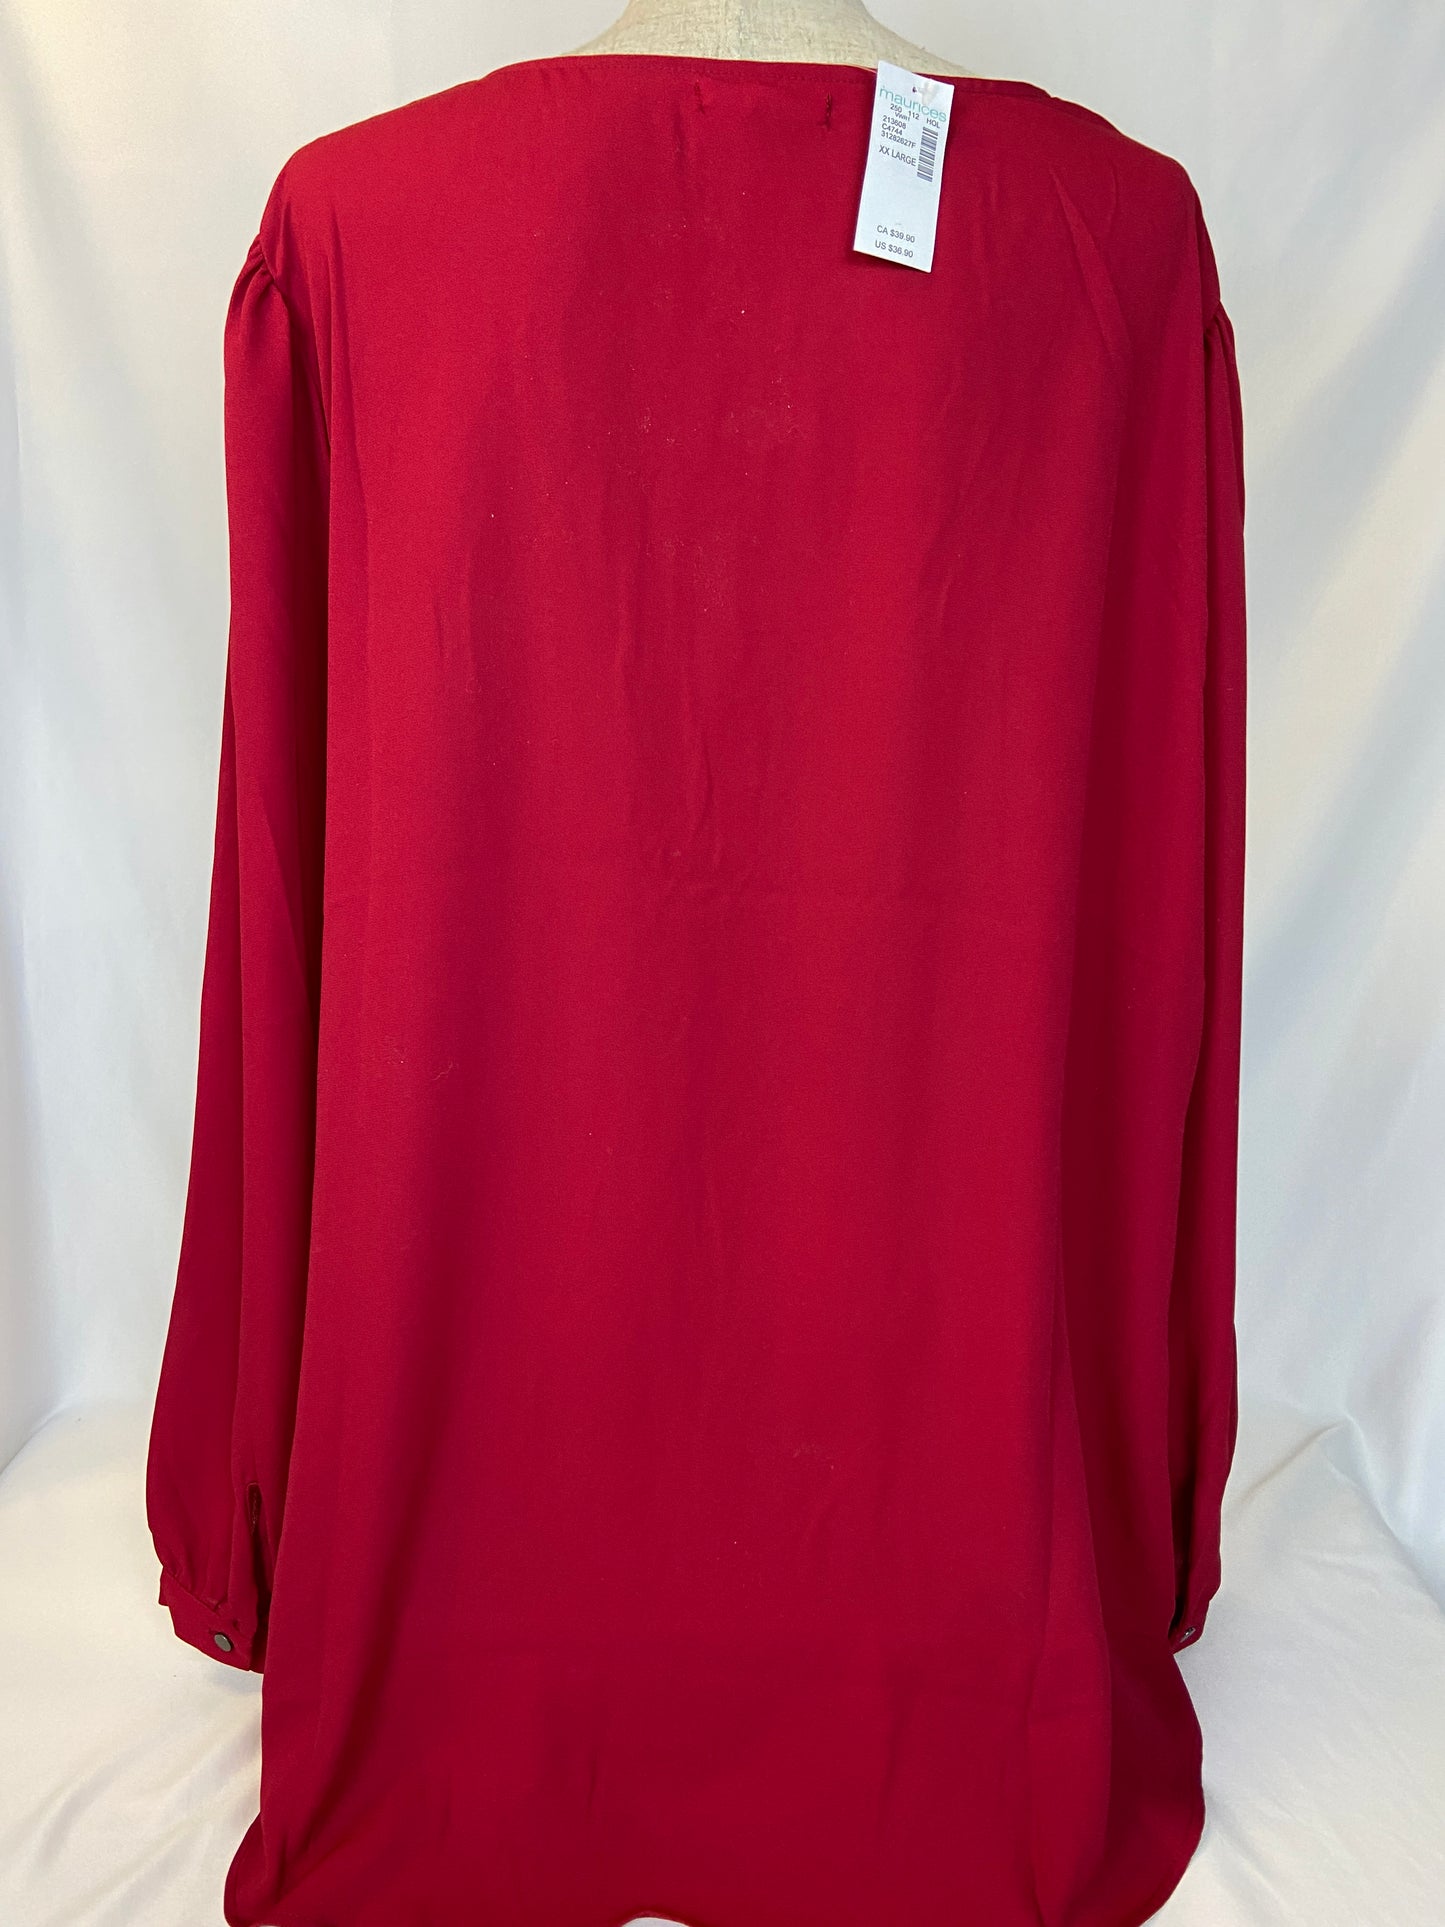 Maurices Size XX Large Red Studded Tunic Blouse NWT